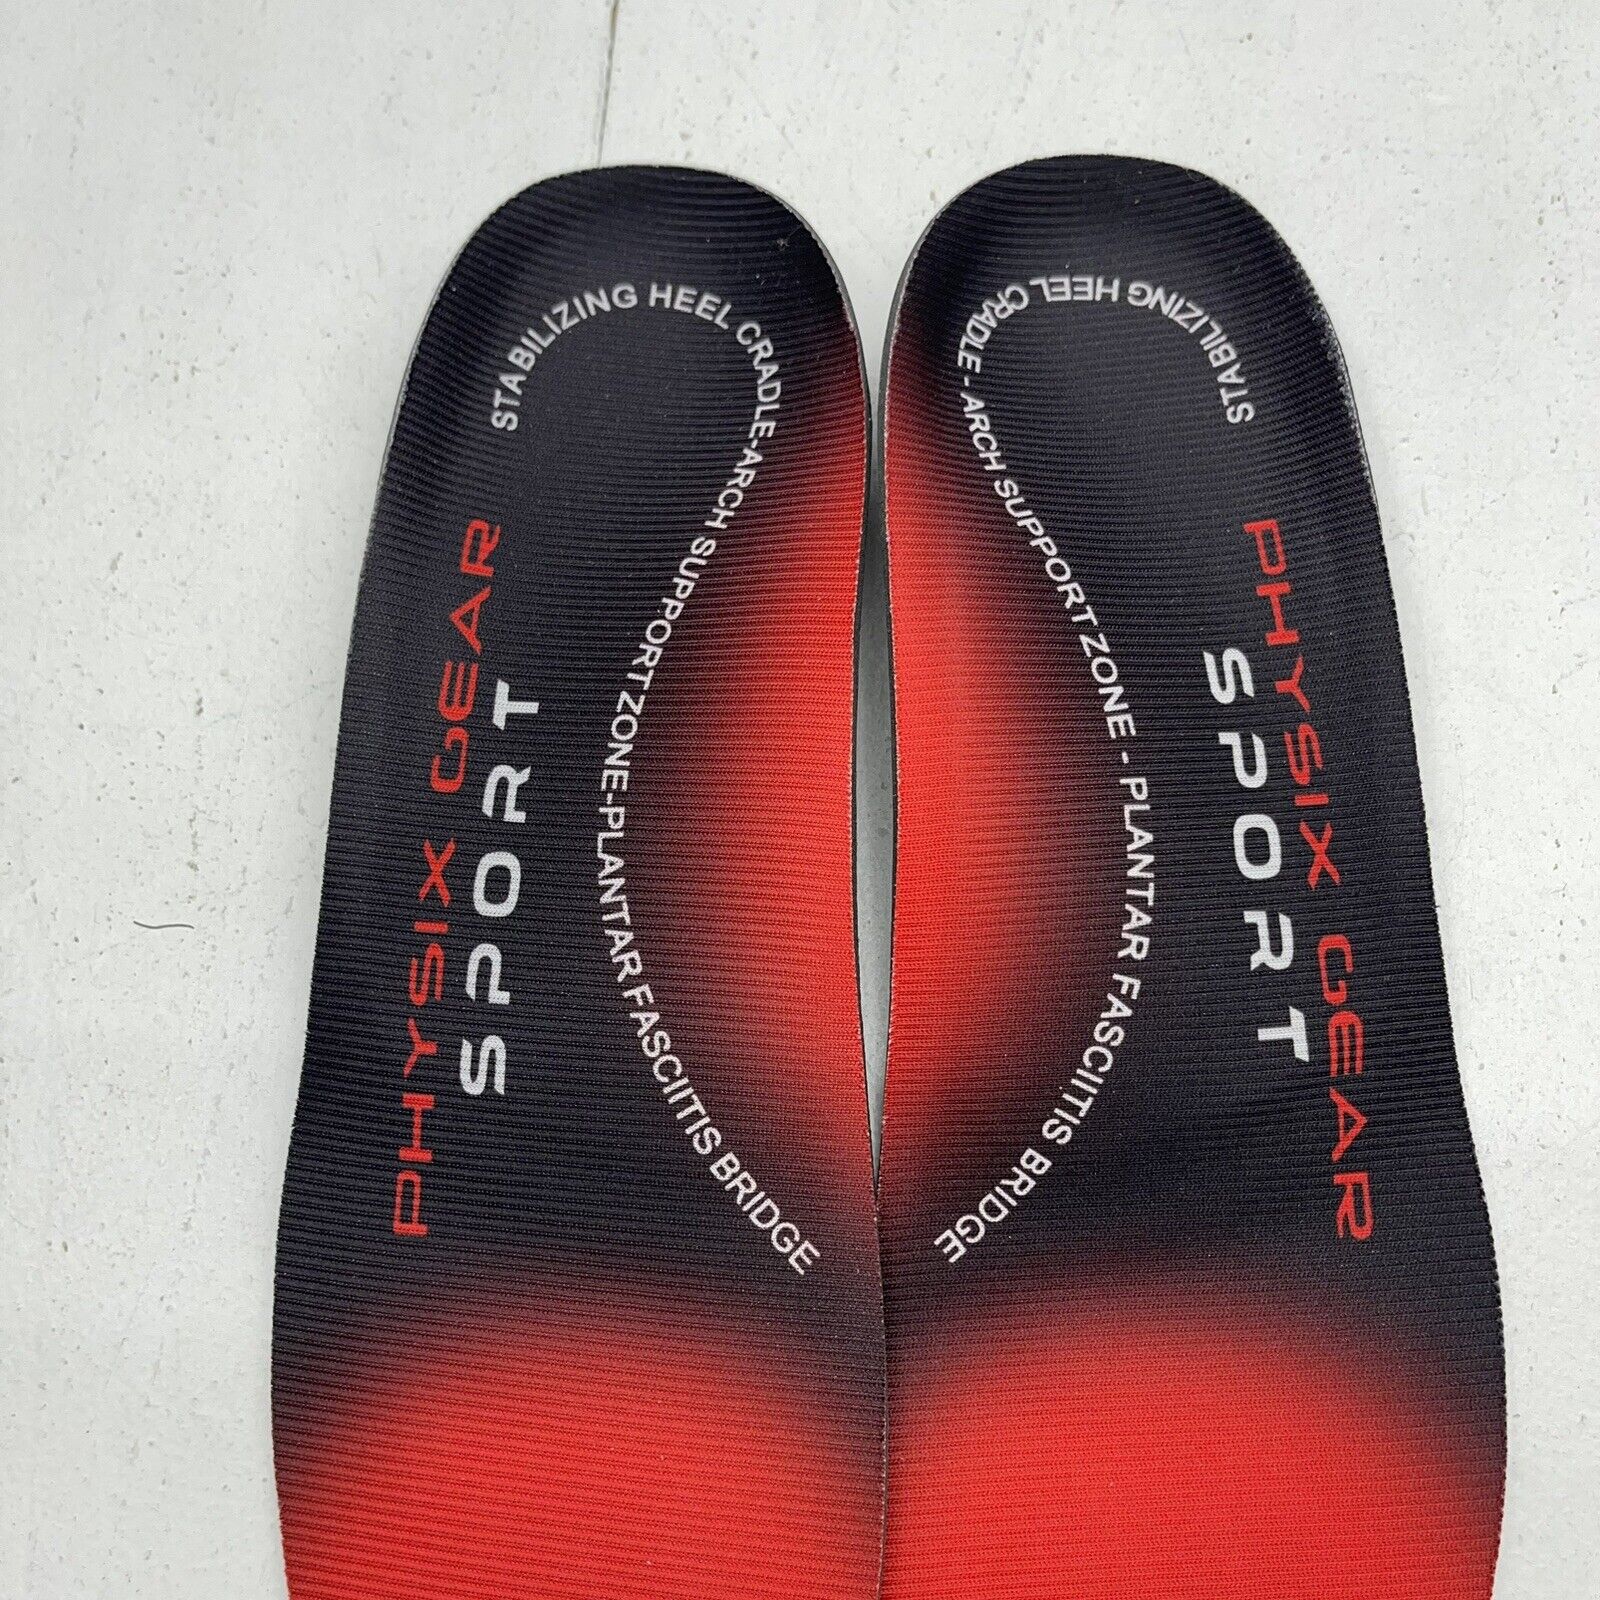 Physix Gear Orthotic Insoles Size XL Mens 12-14.5 Women's 14-16.5 New -  beyond exchange